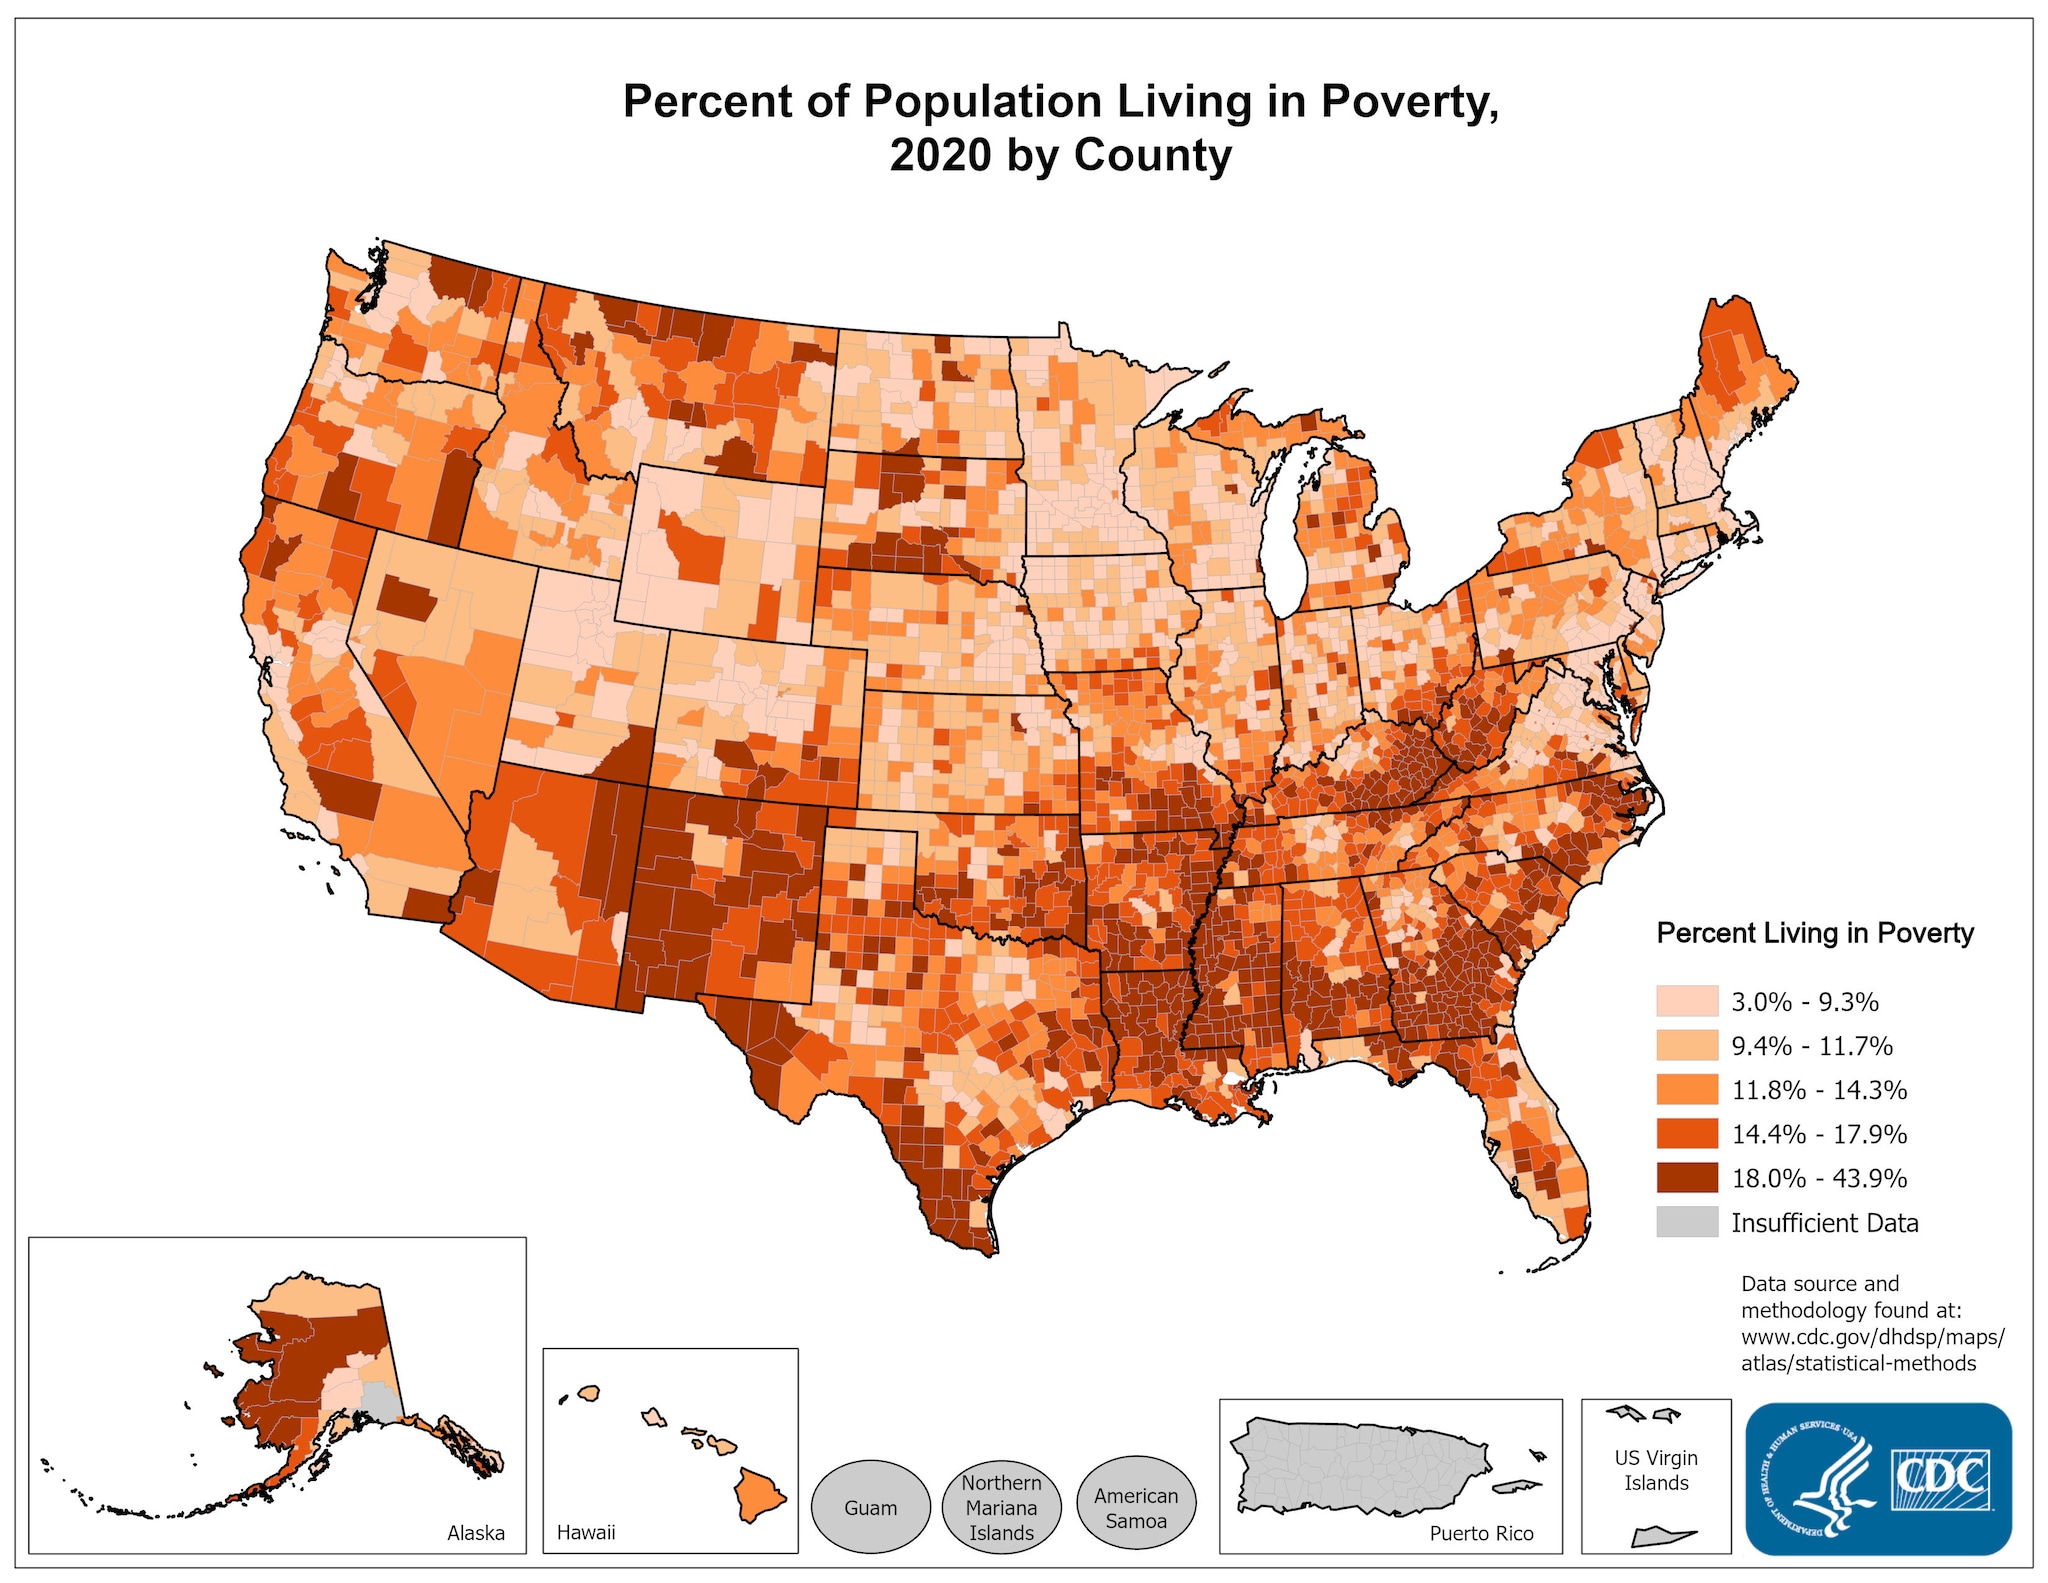 Percentage of population living in poverty, 2014. Counties with the highest percentage of the population living in poverty in 2014 were located primarily in Mississippi, southern Georgia, eastern Kentucky, and parts of Alaska, New Mexico, southern Texas, and Alabama. The range in the percentage living in poverty was between 3.2% and 52.2%.